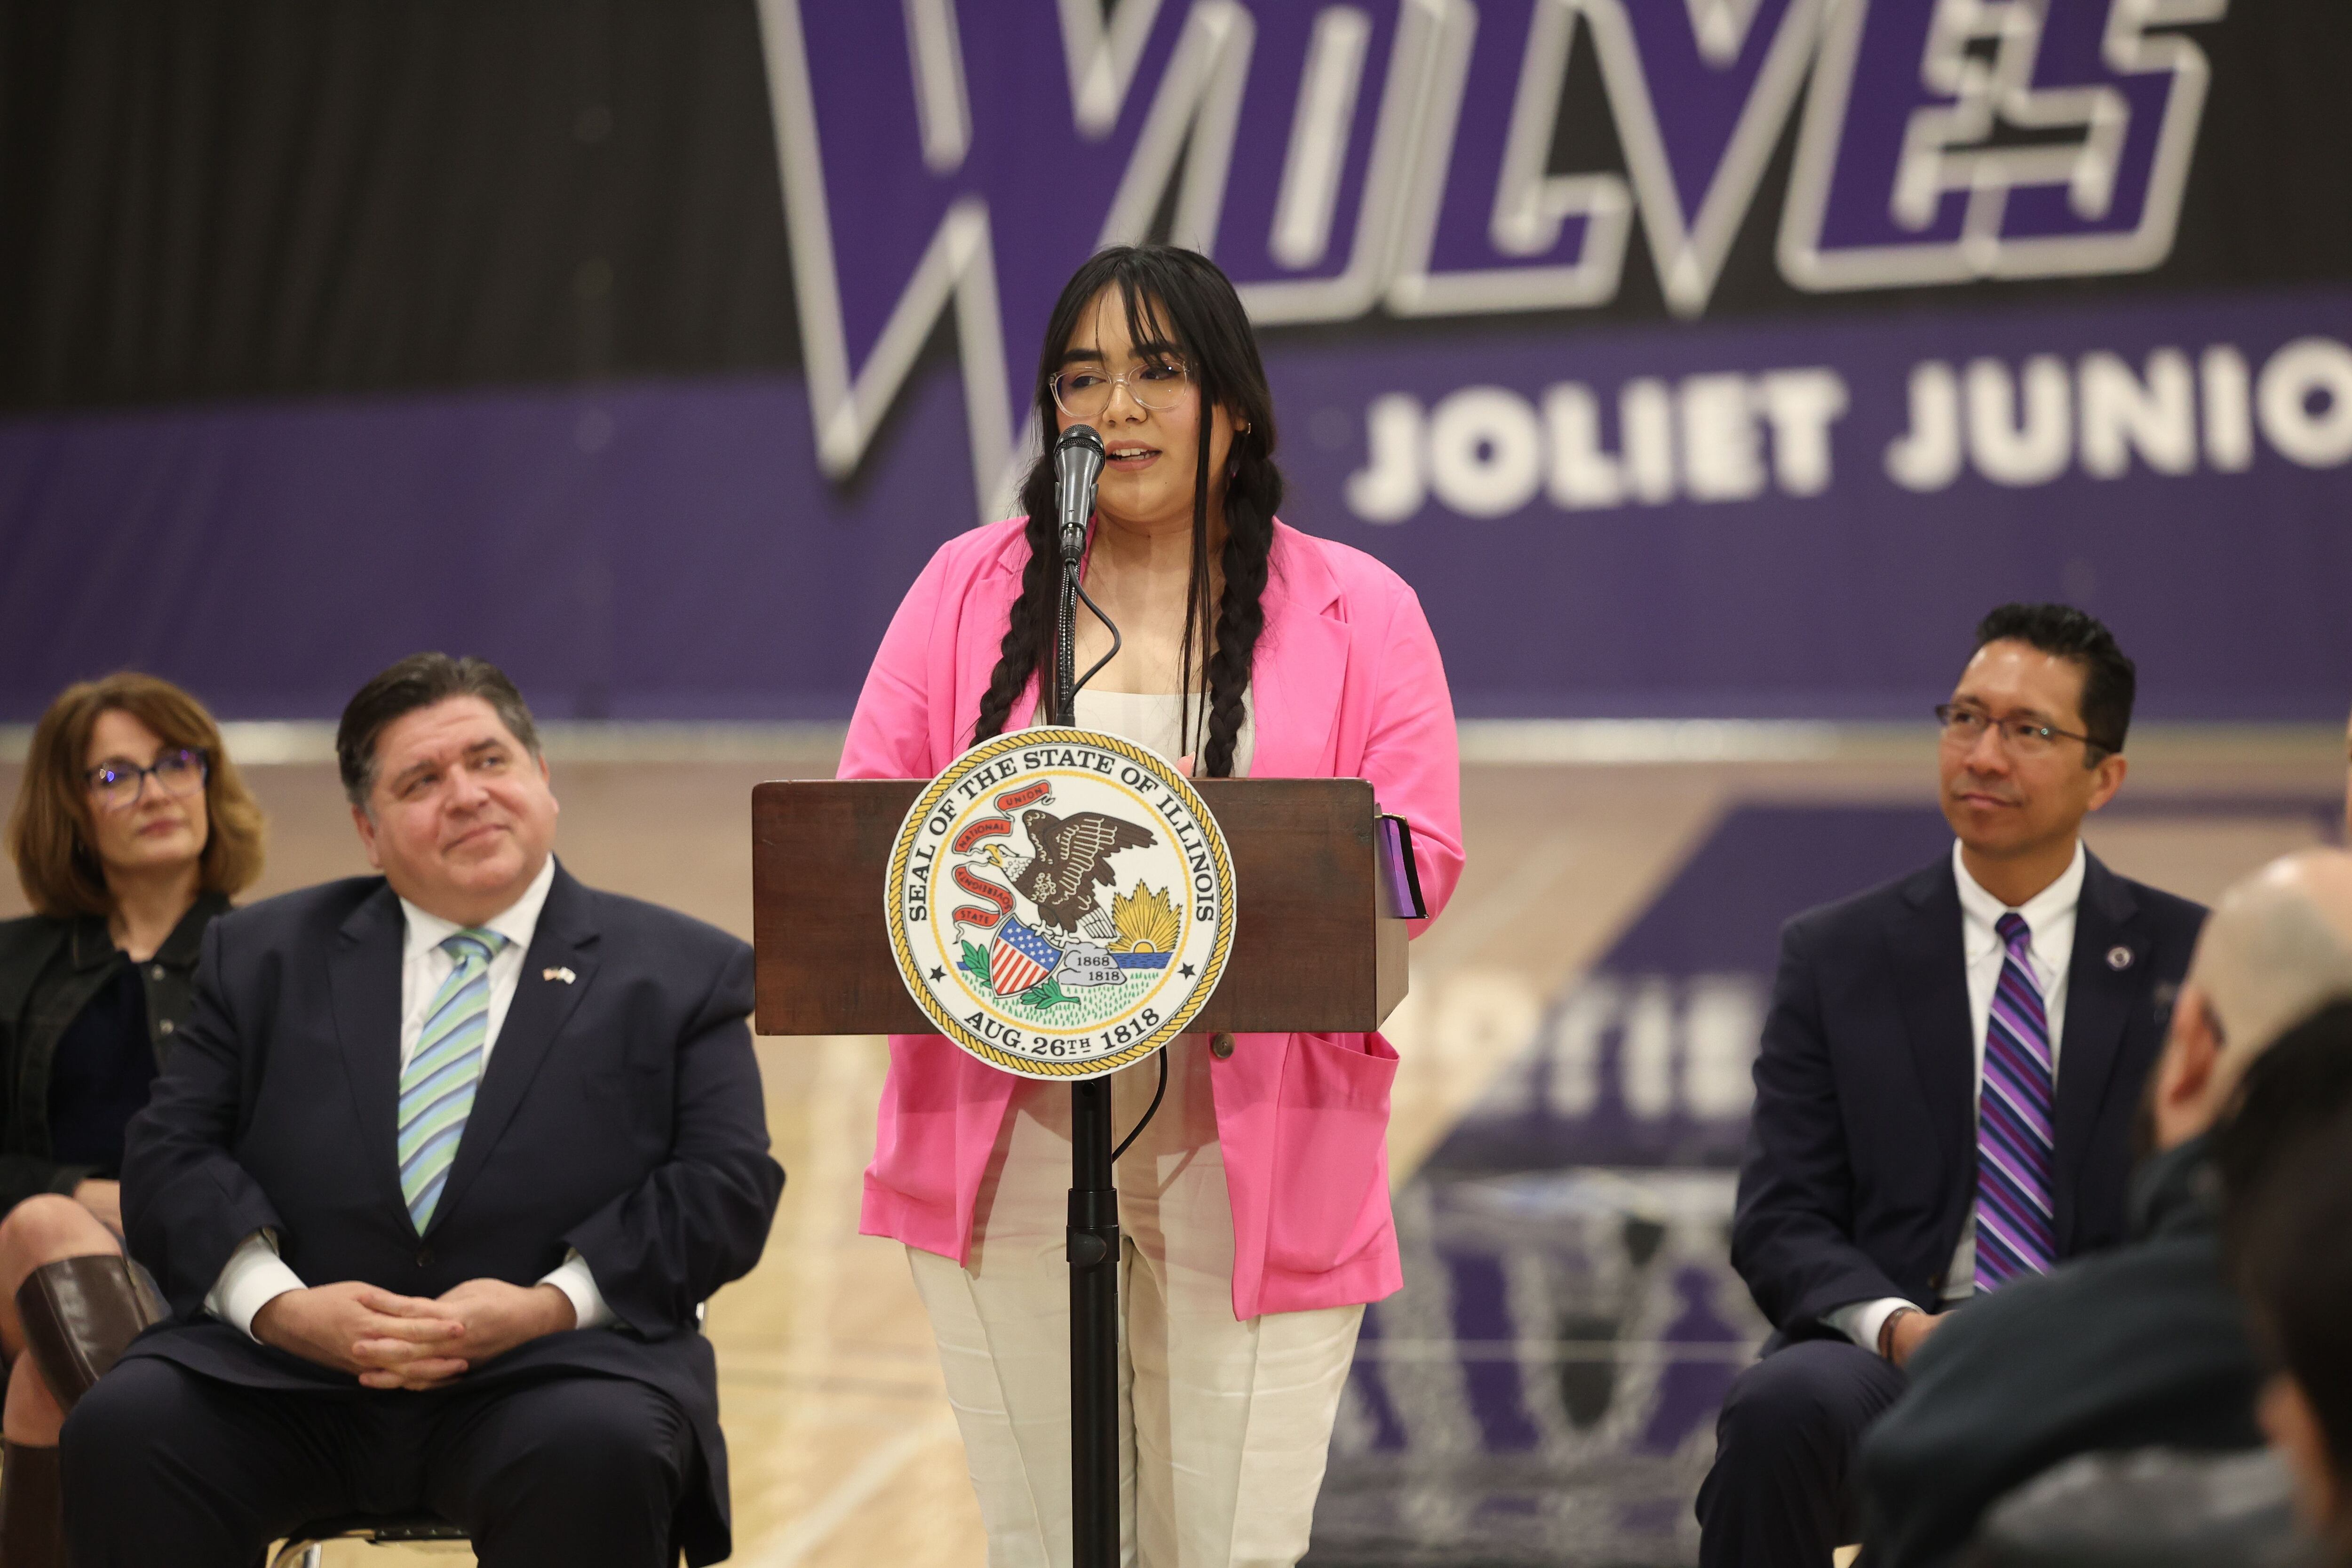 JJC student Jazmin Martinez, recipient of the Map and Pell grant, speaks at a press conference regarding the state’s proposed investment in higher education at Joliet Junior College on Thursday, March 16th, 2023.